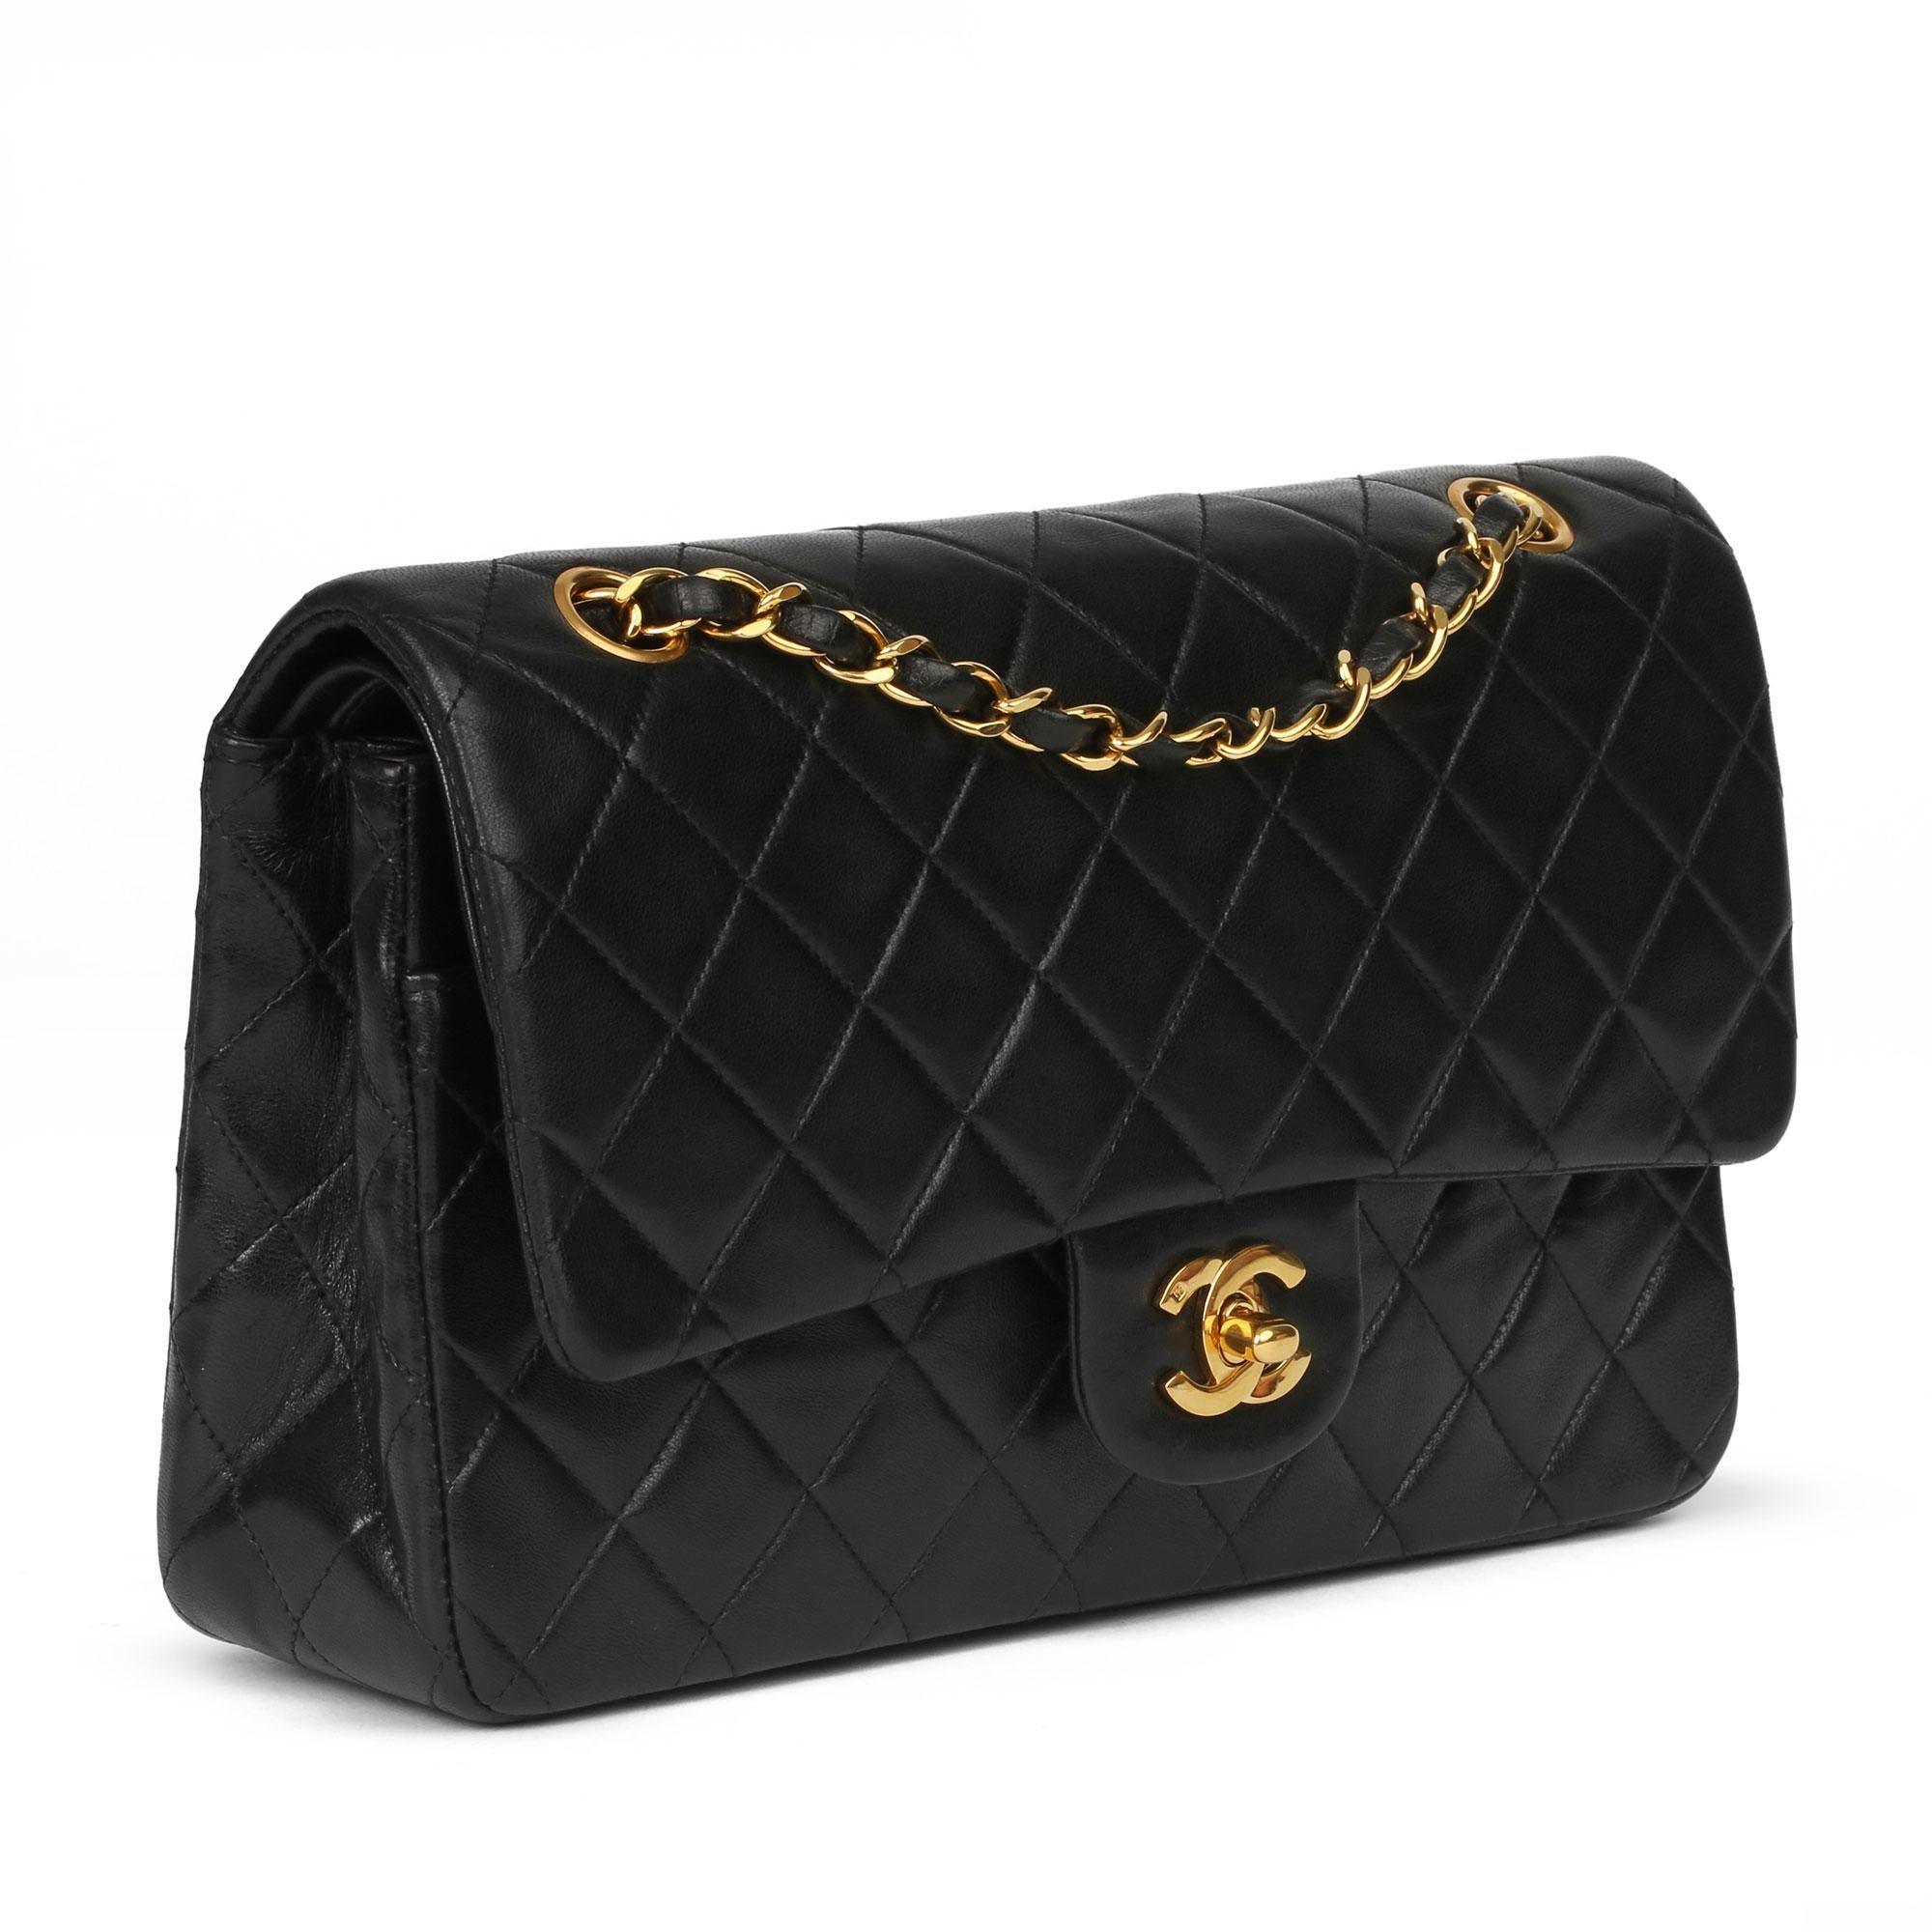 CHANEL
Black Quilted Lambskin Vintage Medium Classic Double Flap Bag

Xupes Reference: HB3939
Serial Number: 2457475
Age (Circa): 1994
Accompanied By: Chanel Dust Bag
Authenticity Details: Serial Sticker (Made in France) 
Gender: Ladies
Type: